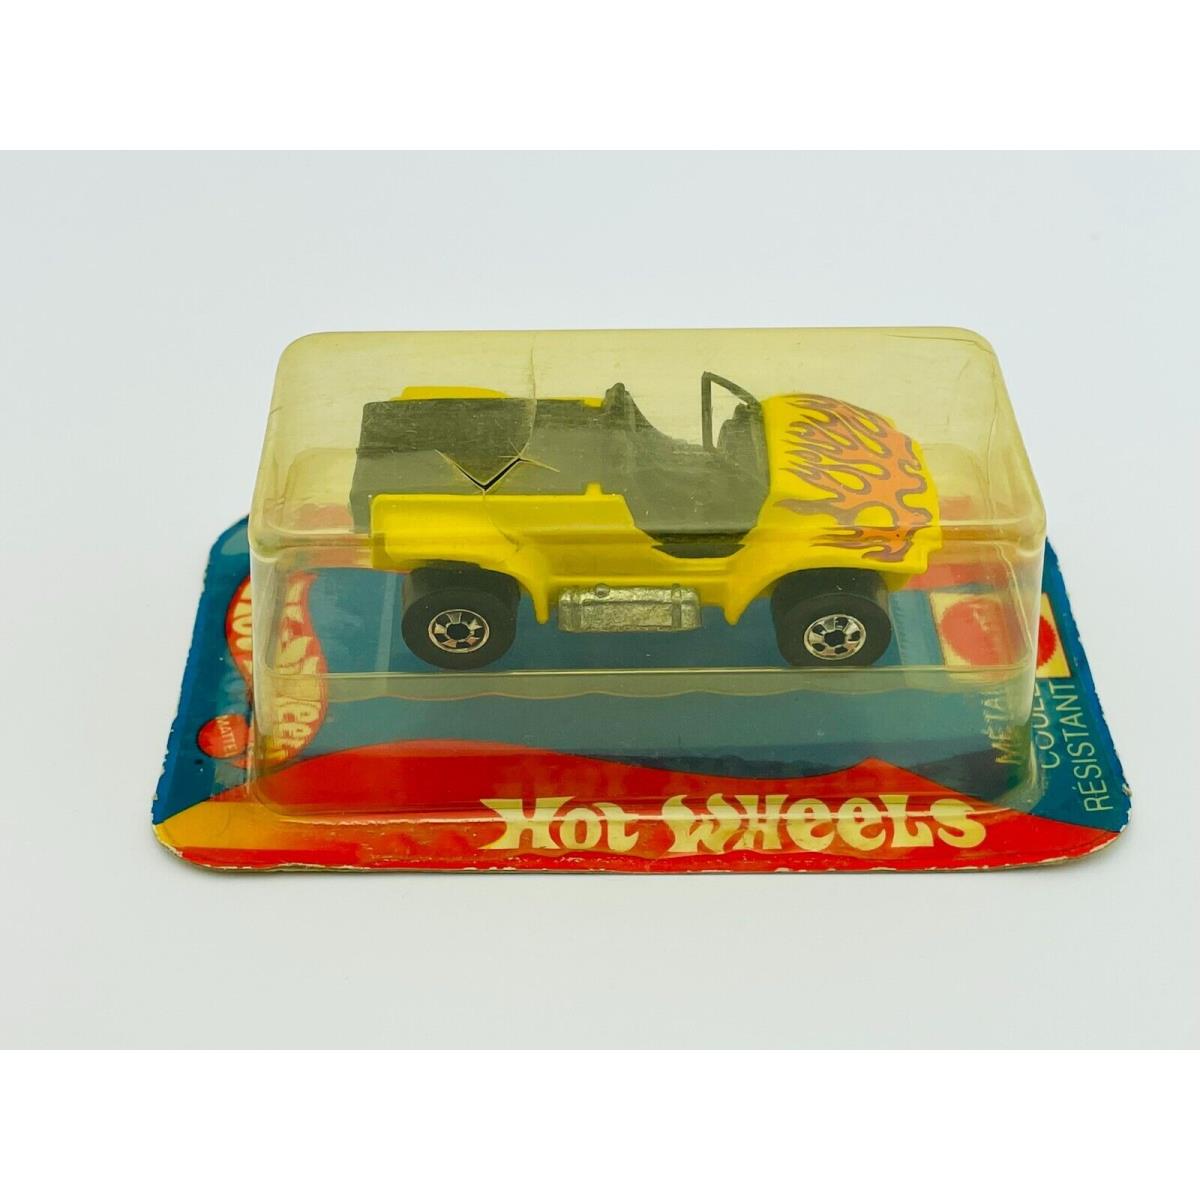 Hot Wheels French Blackwall Sand Drifter Yellow in Cube Made in France